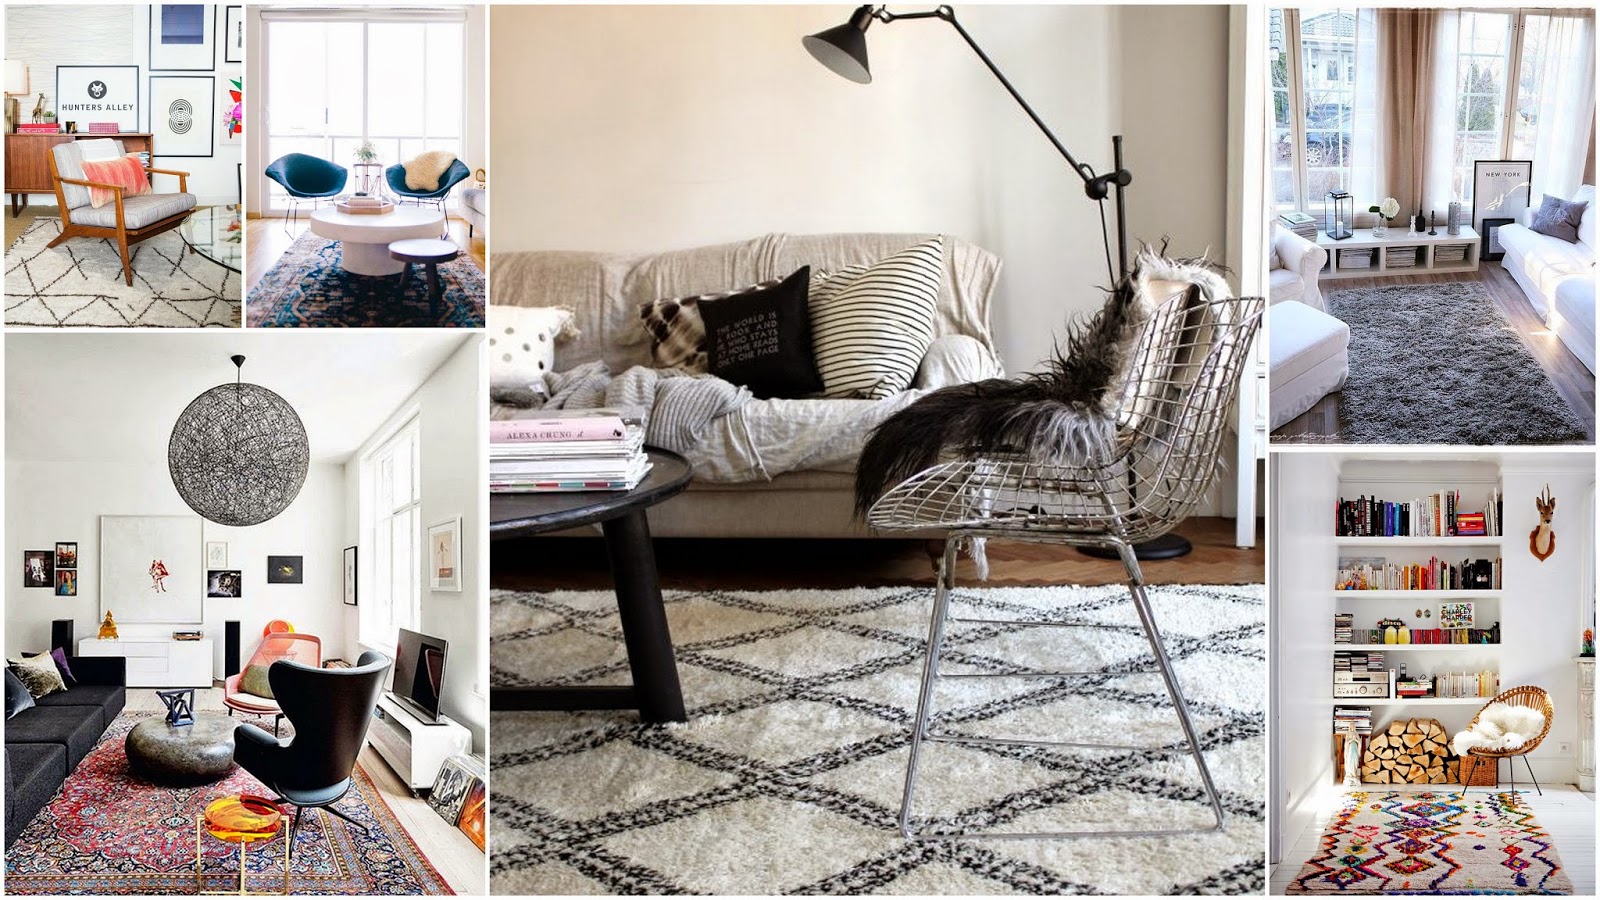 Affordable interiors: Rugs